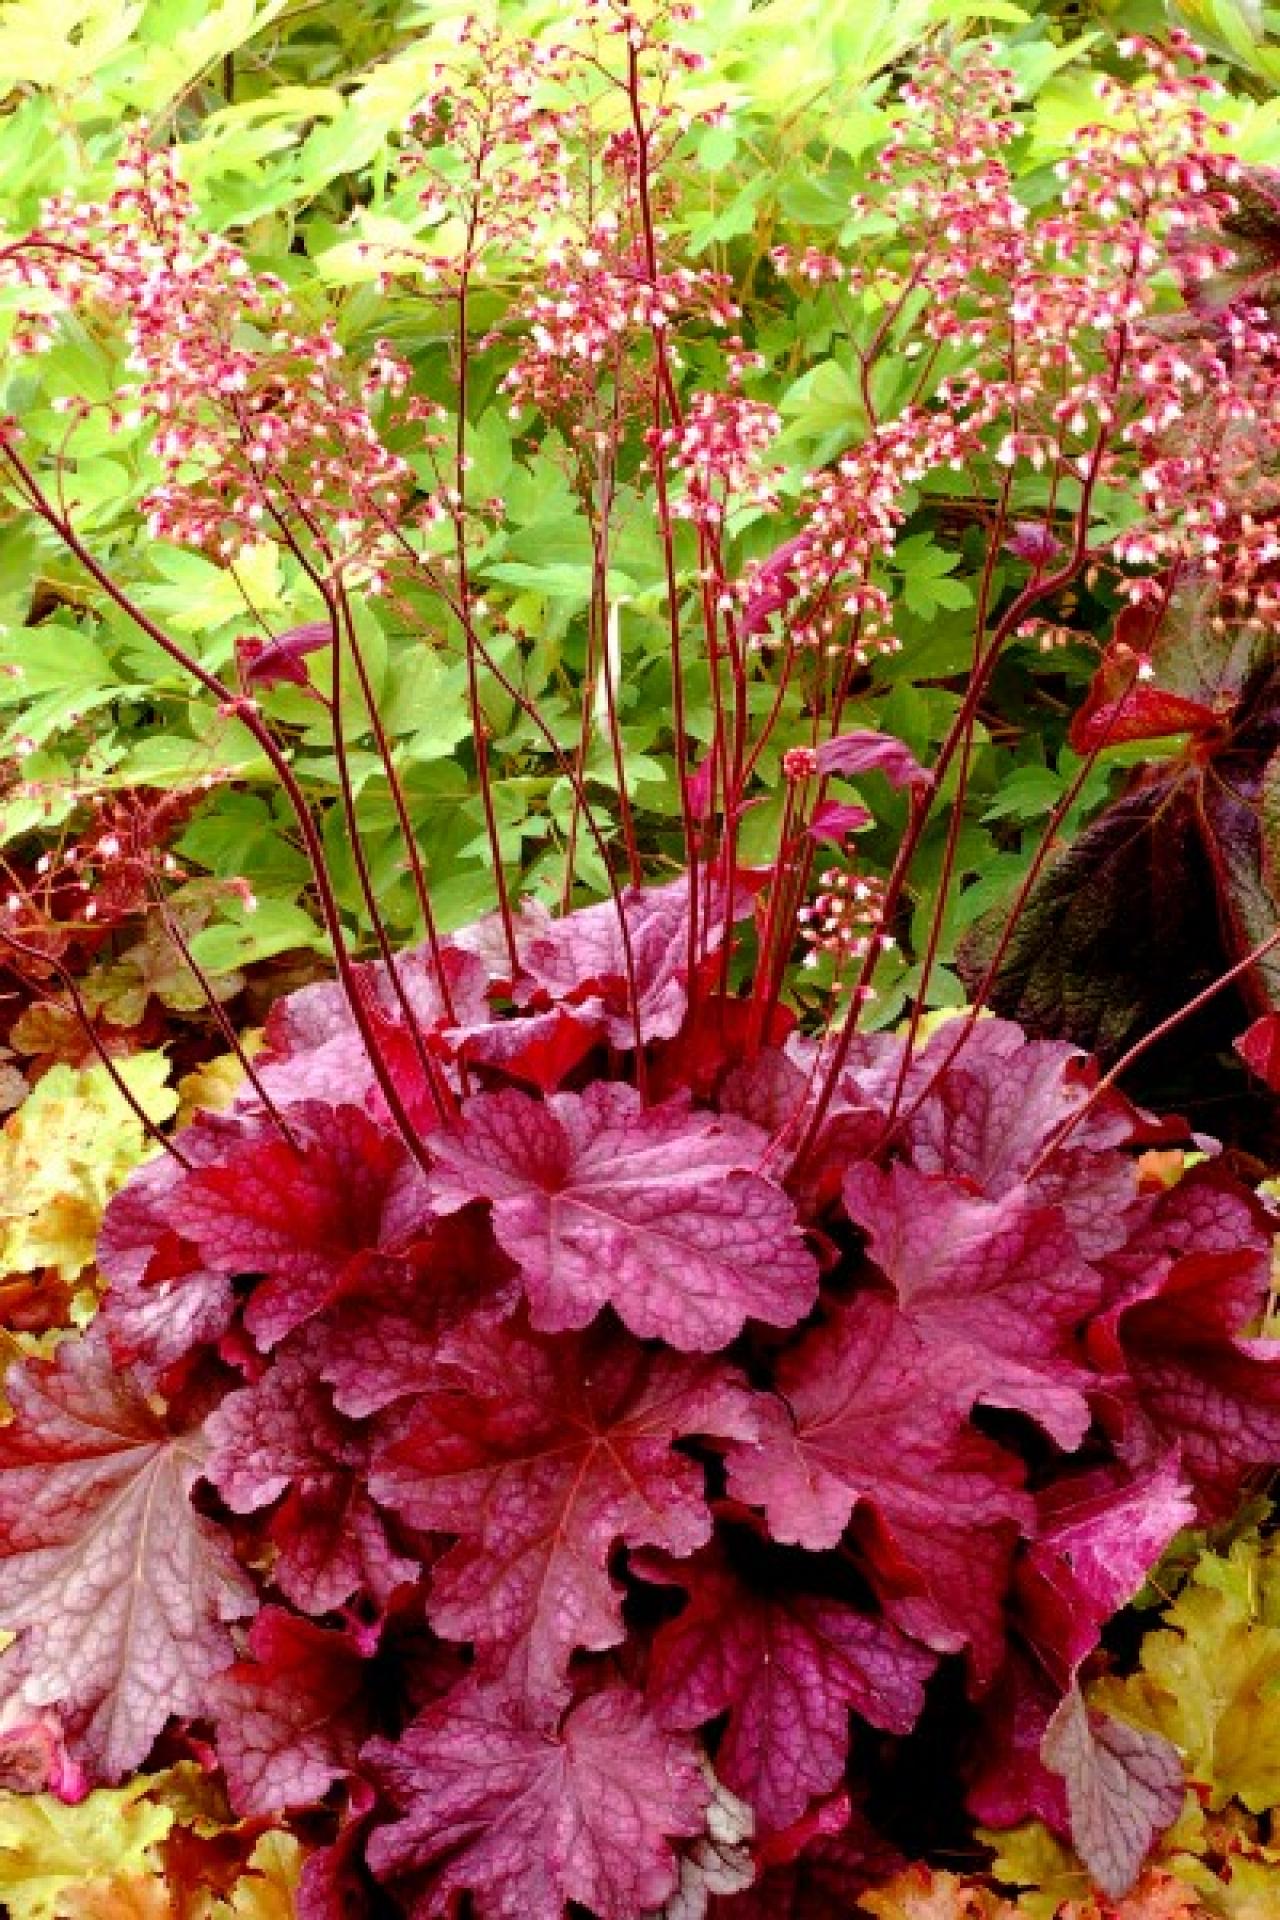 Planting Coral Bells: How to Grow and Care for These Colorful